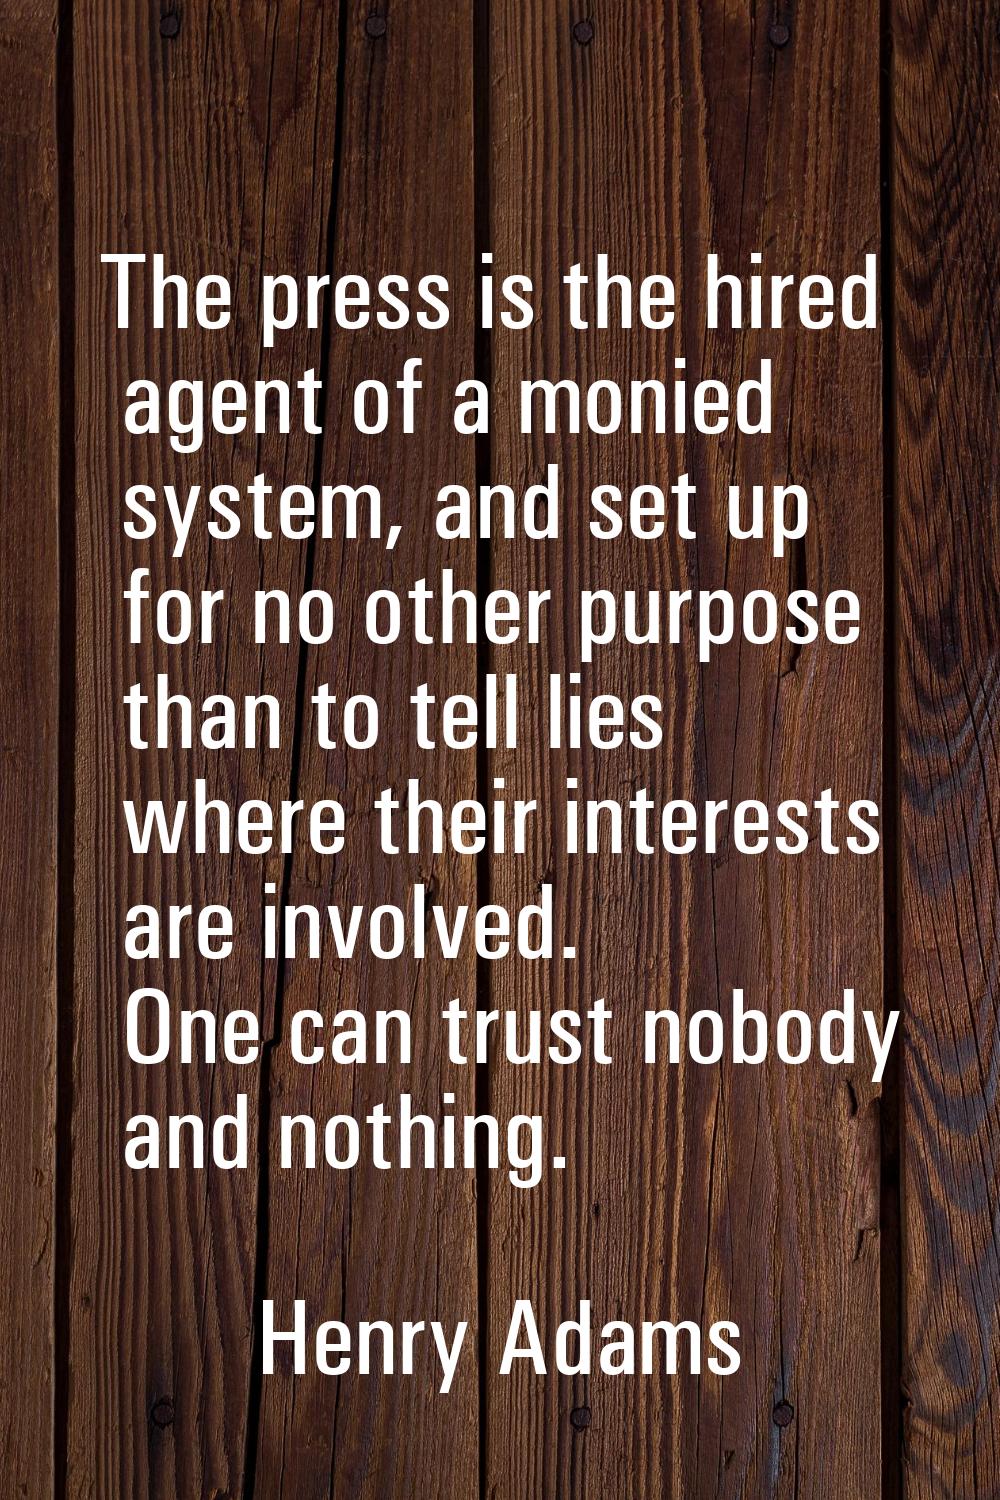 The press is the hired agent of a monied system, and set up for no other purpose than to tell lies 